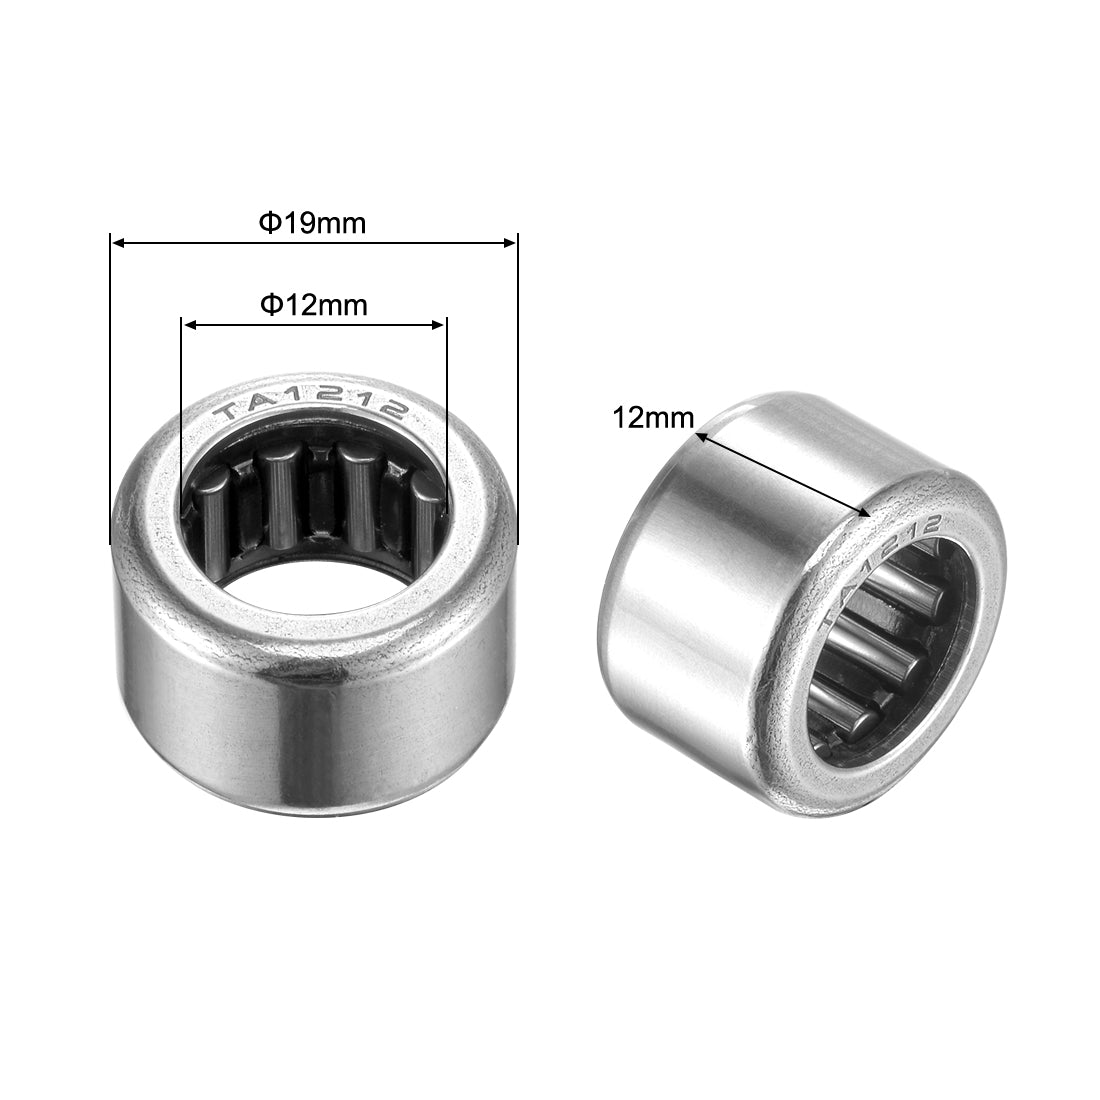 uxcell Uxcell TA2030 Needle Roller Bearings 20mm x 27mm x 30mm Chrome Steel Open End 2pcs